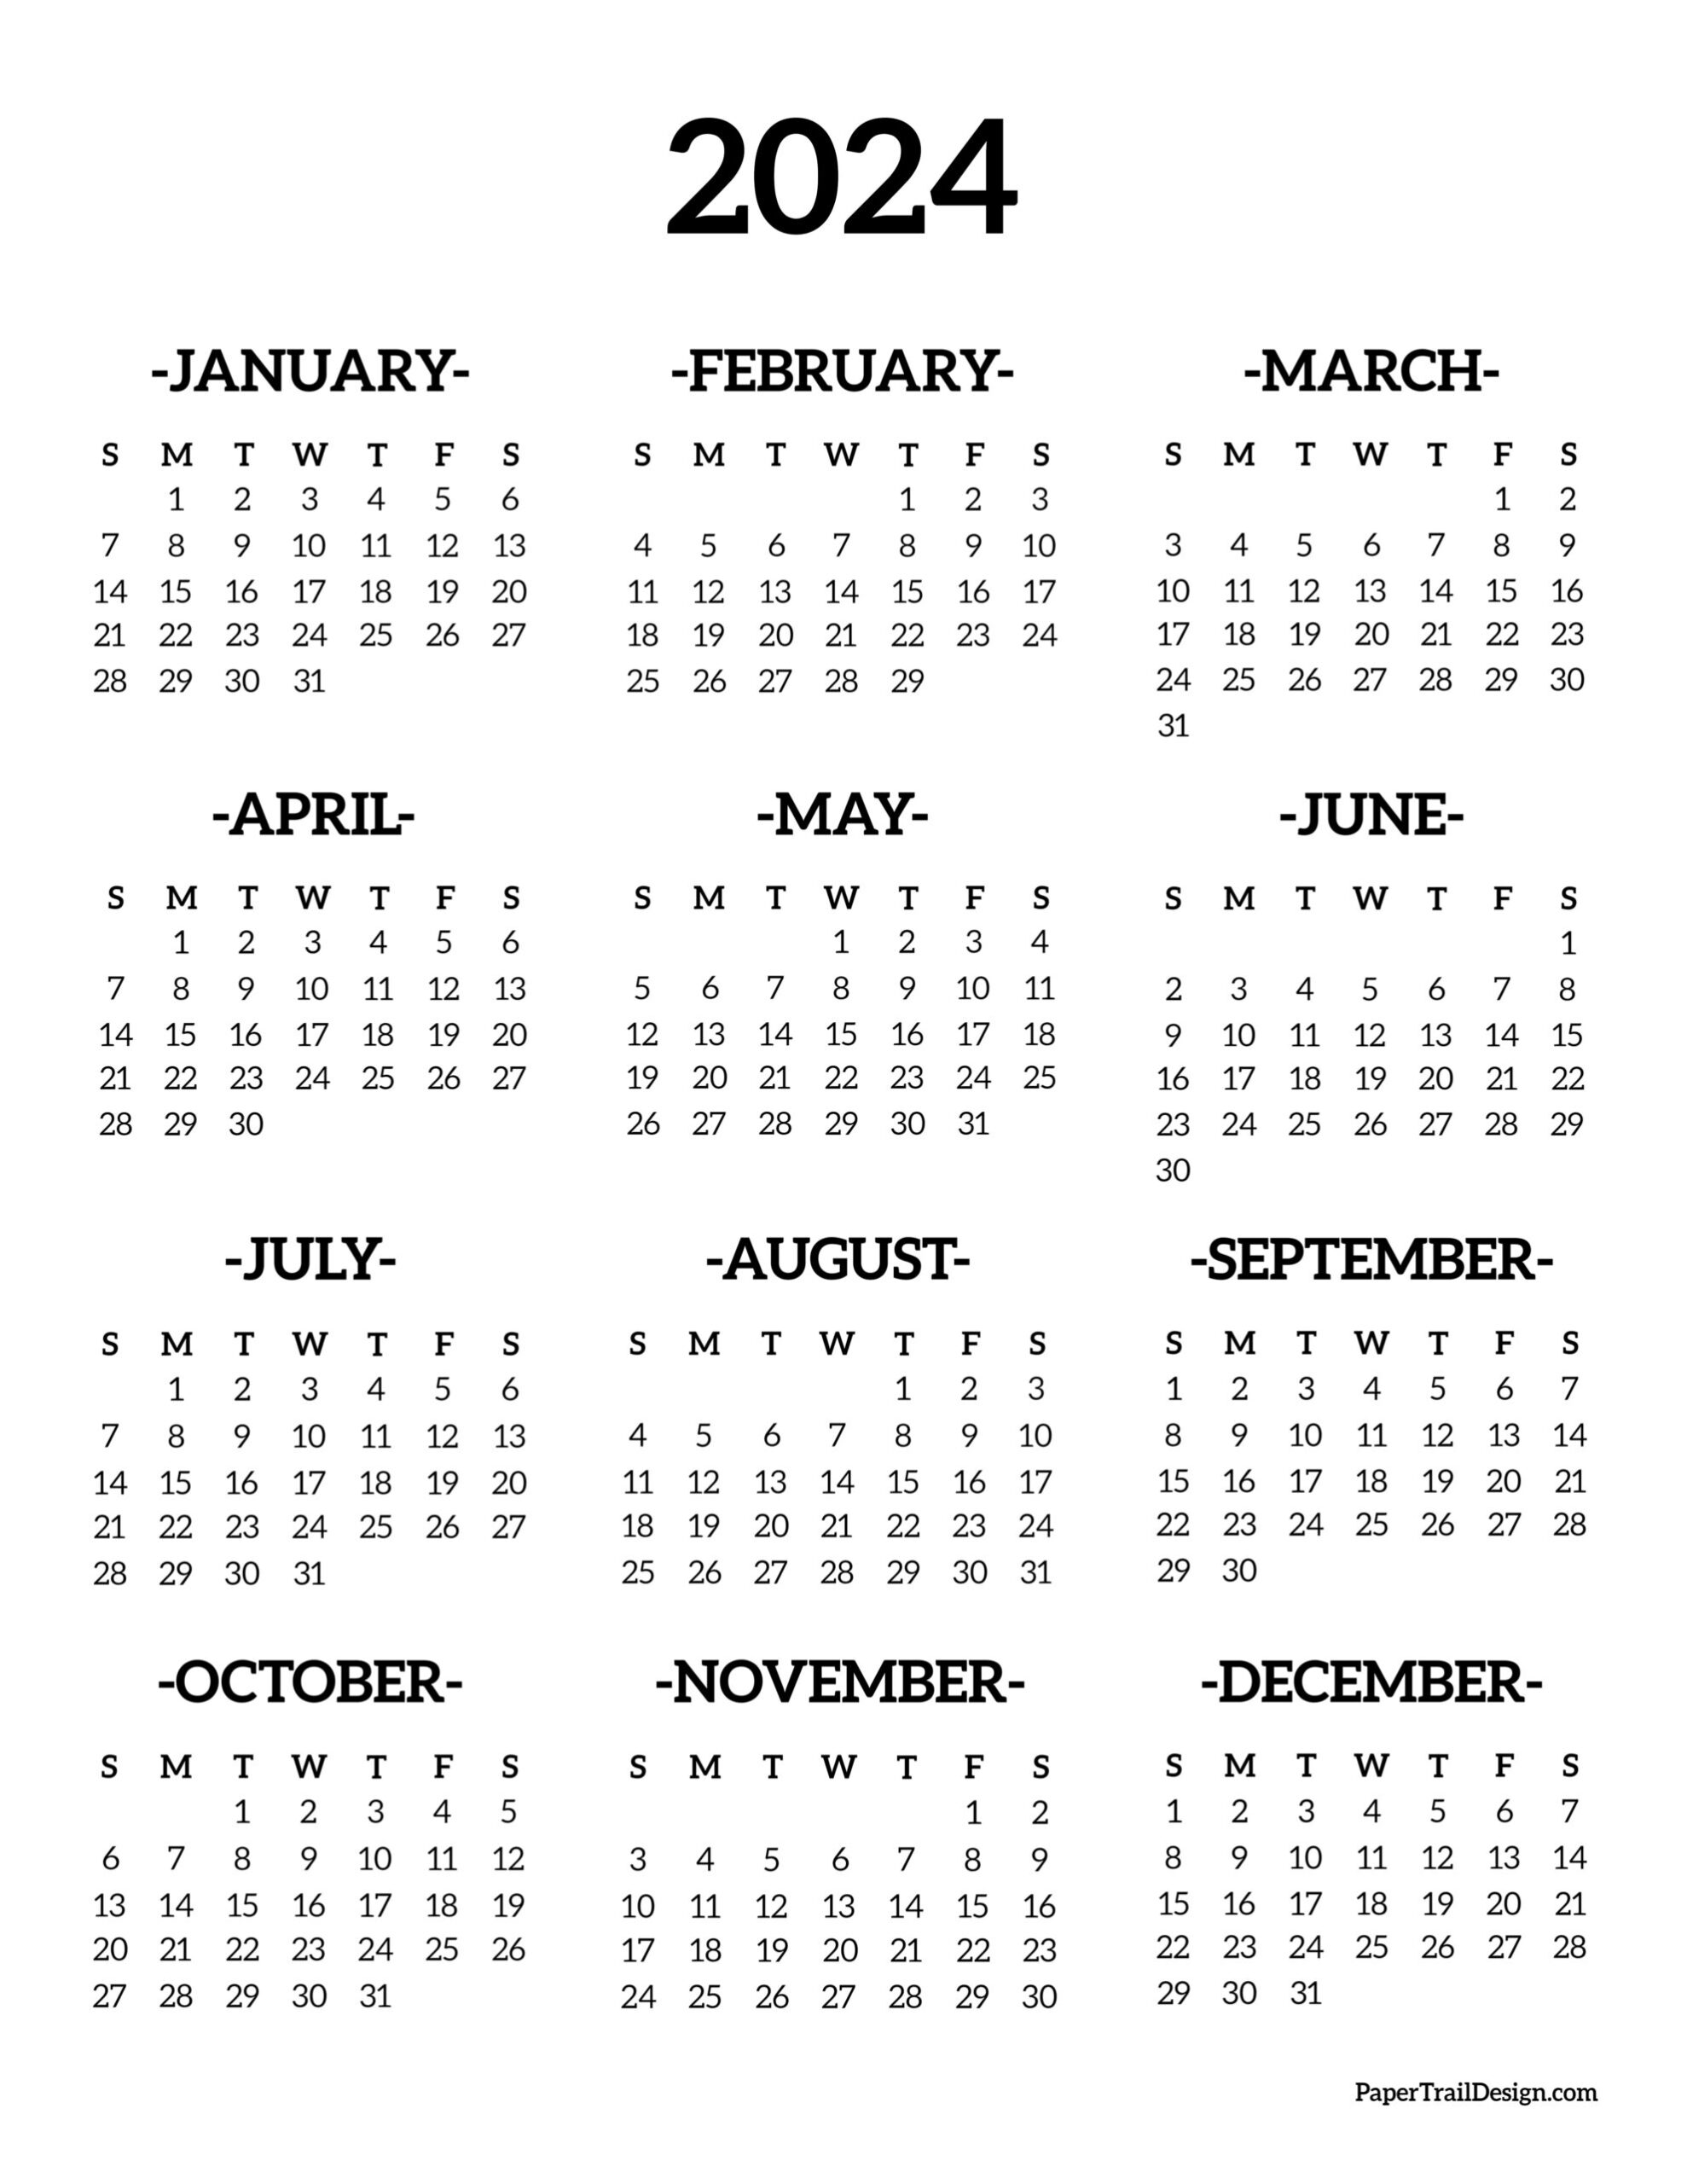 Calendar 2024 Printable One Page - Paper Trail Design for Printable Calendar 2024 Year